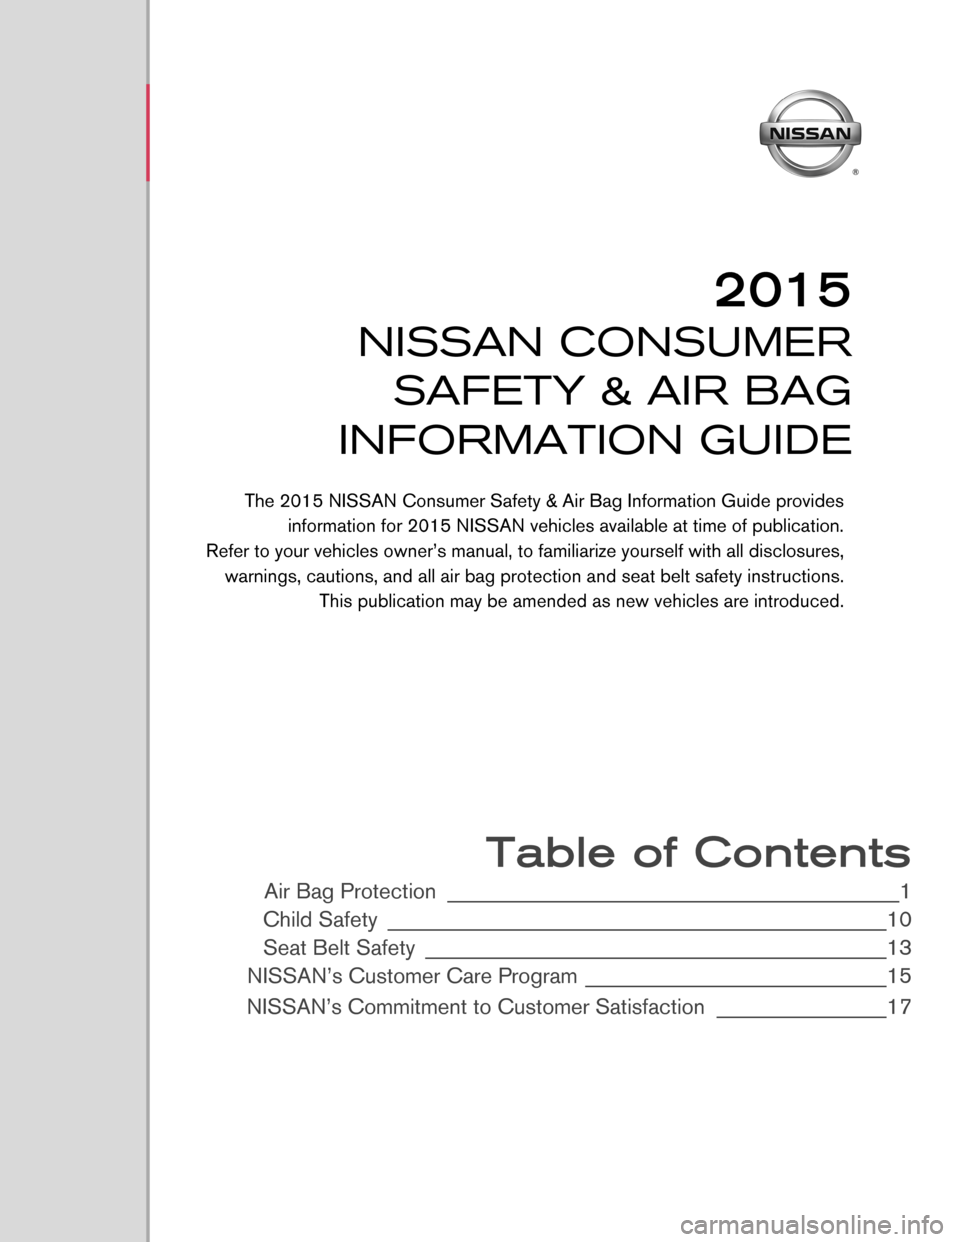 NISSAN ALTIMA 2015 L33 / 5.G Consumer Safety Air Bag Information Guide  
 
 
 
 
 
 
 
 
 
 
 
 
 
 
 
 
 
 
 
 
 
 
 Table of Contents 
Air Bag Protection __________________\d__________________\d____________1 
Child \fafety _________________________\d__________________\